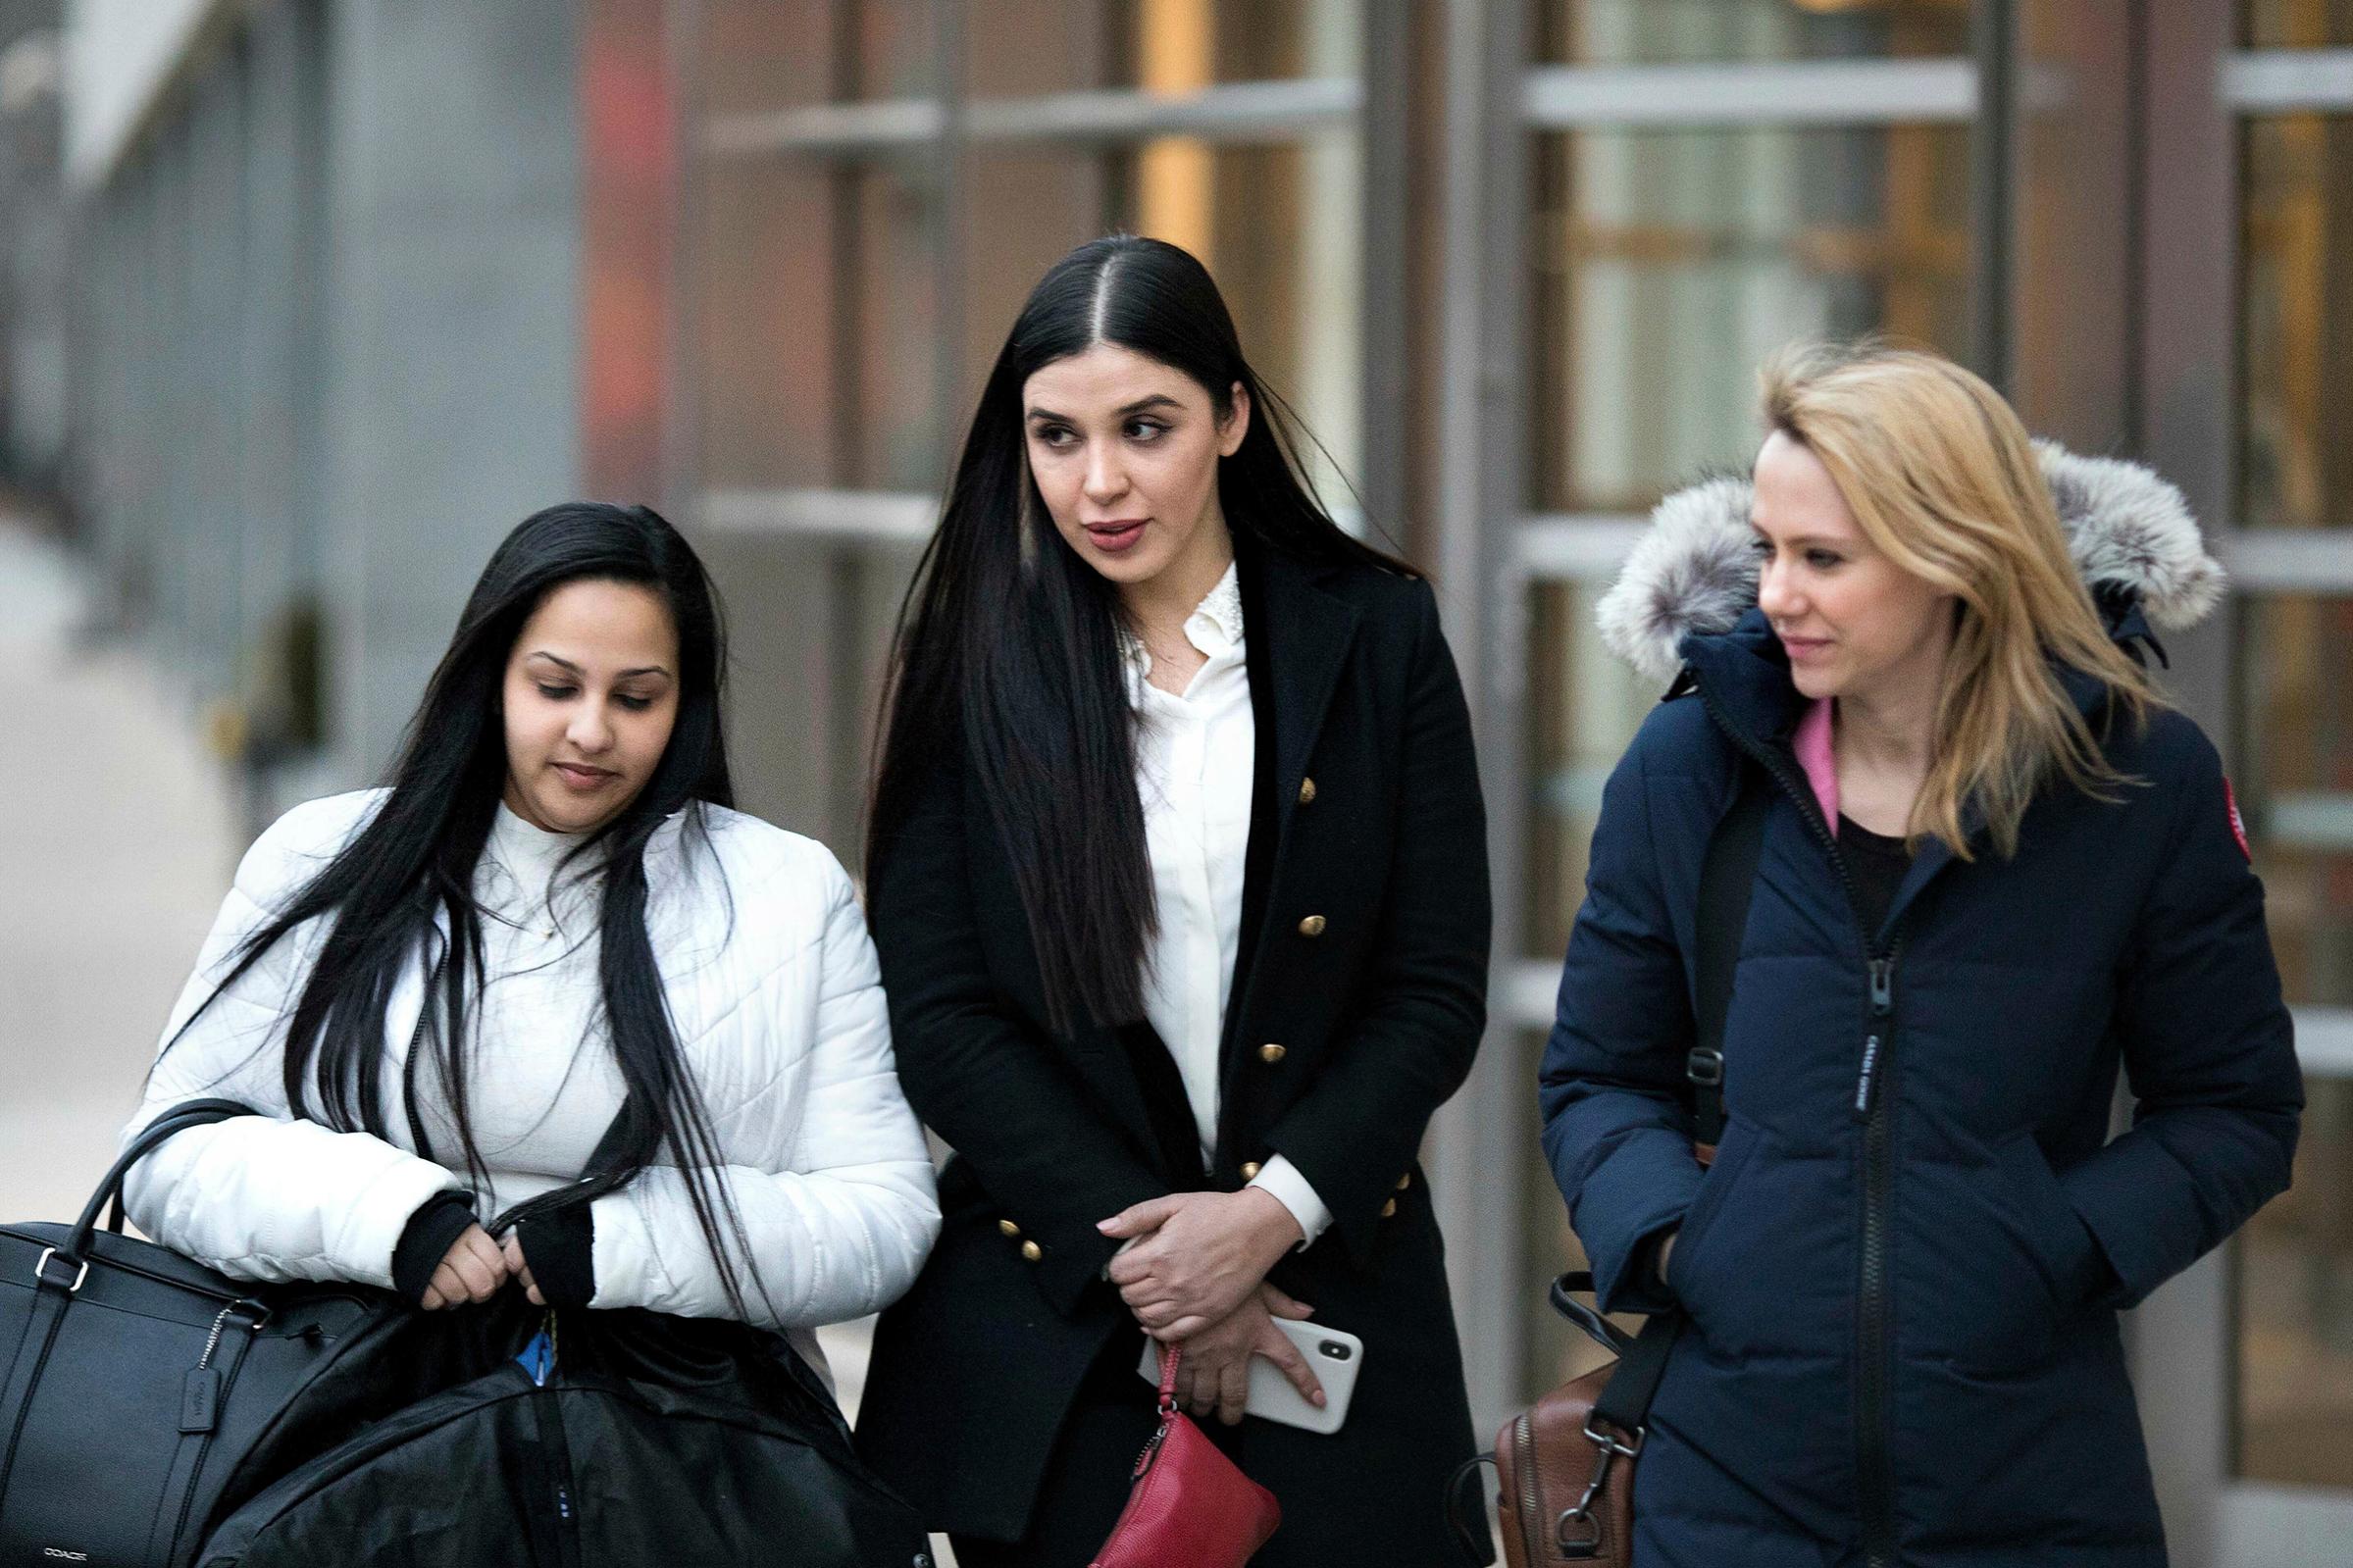 Emma Coronel Aispuro, center, leaves Brooklyn federal court, in New York, after attending the trial of her husband Joaquin "El Chapo" Guzman